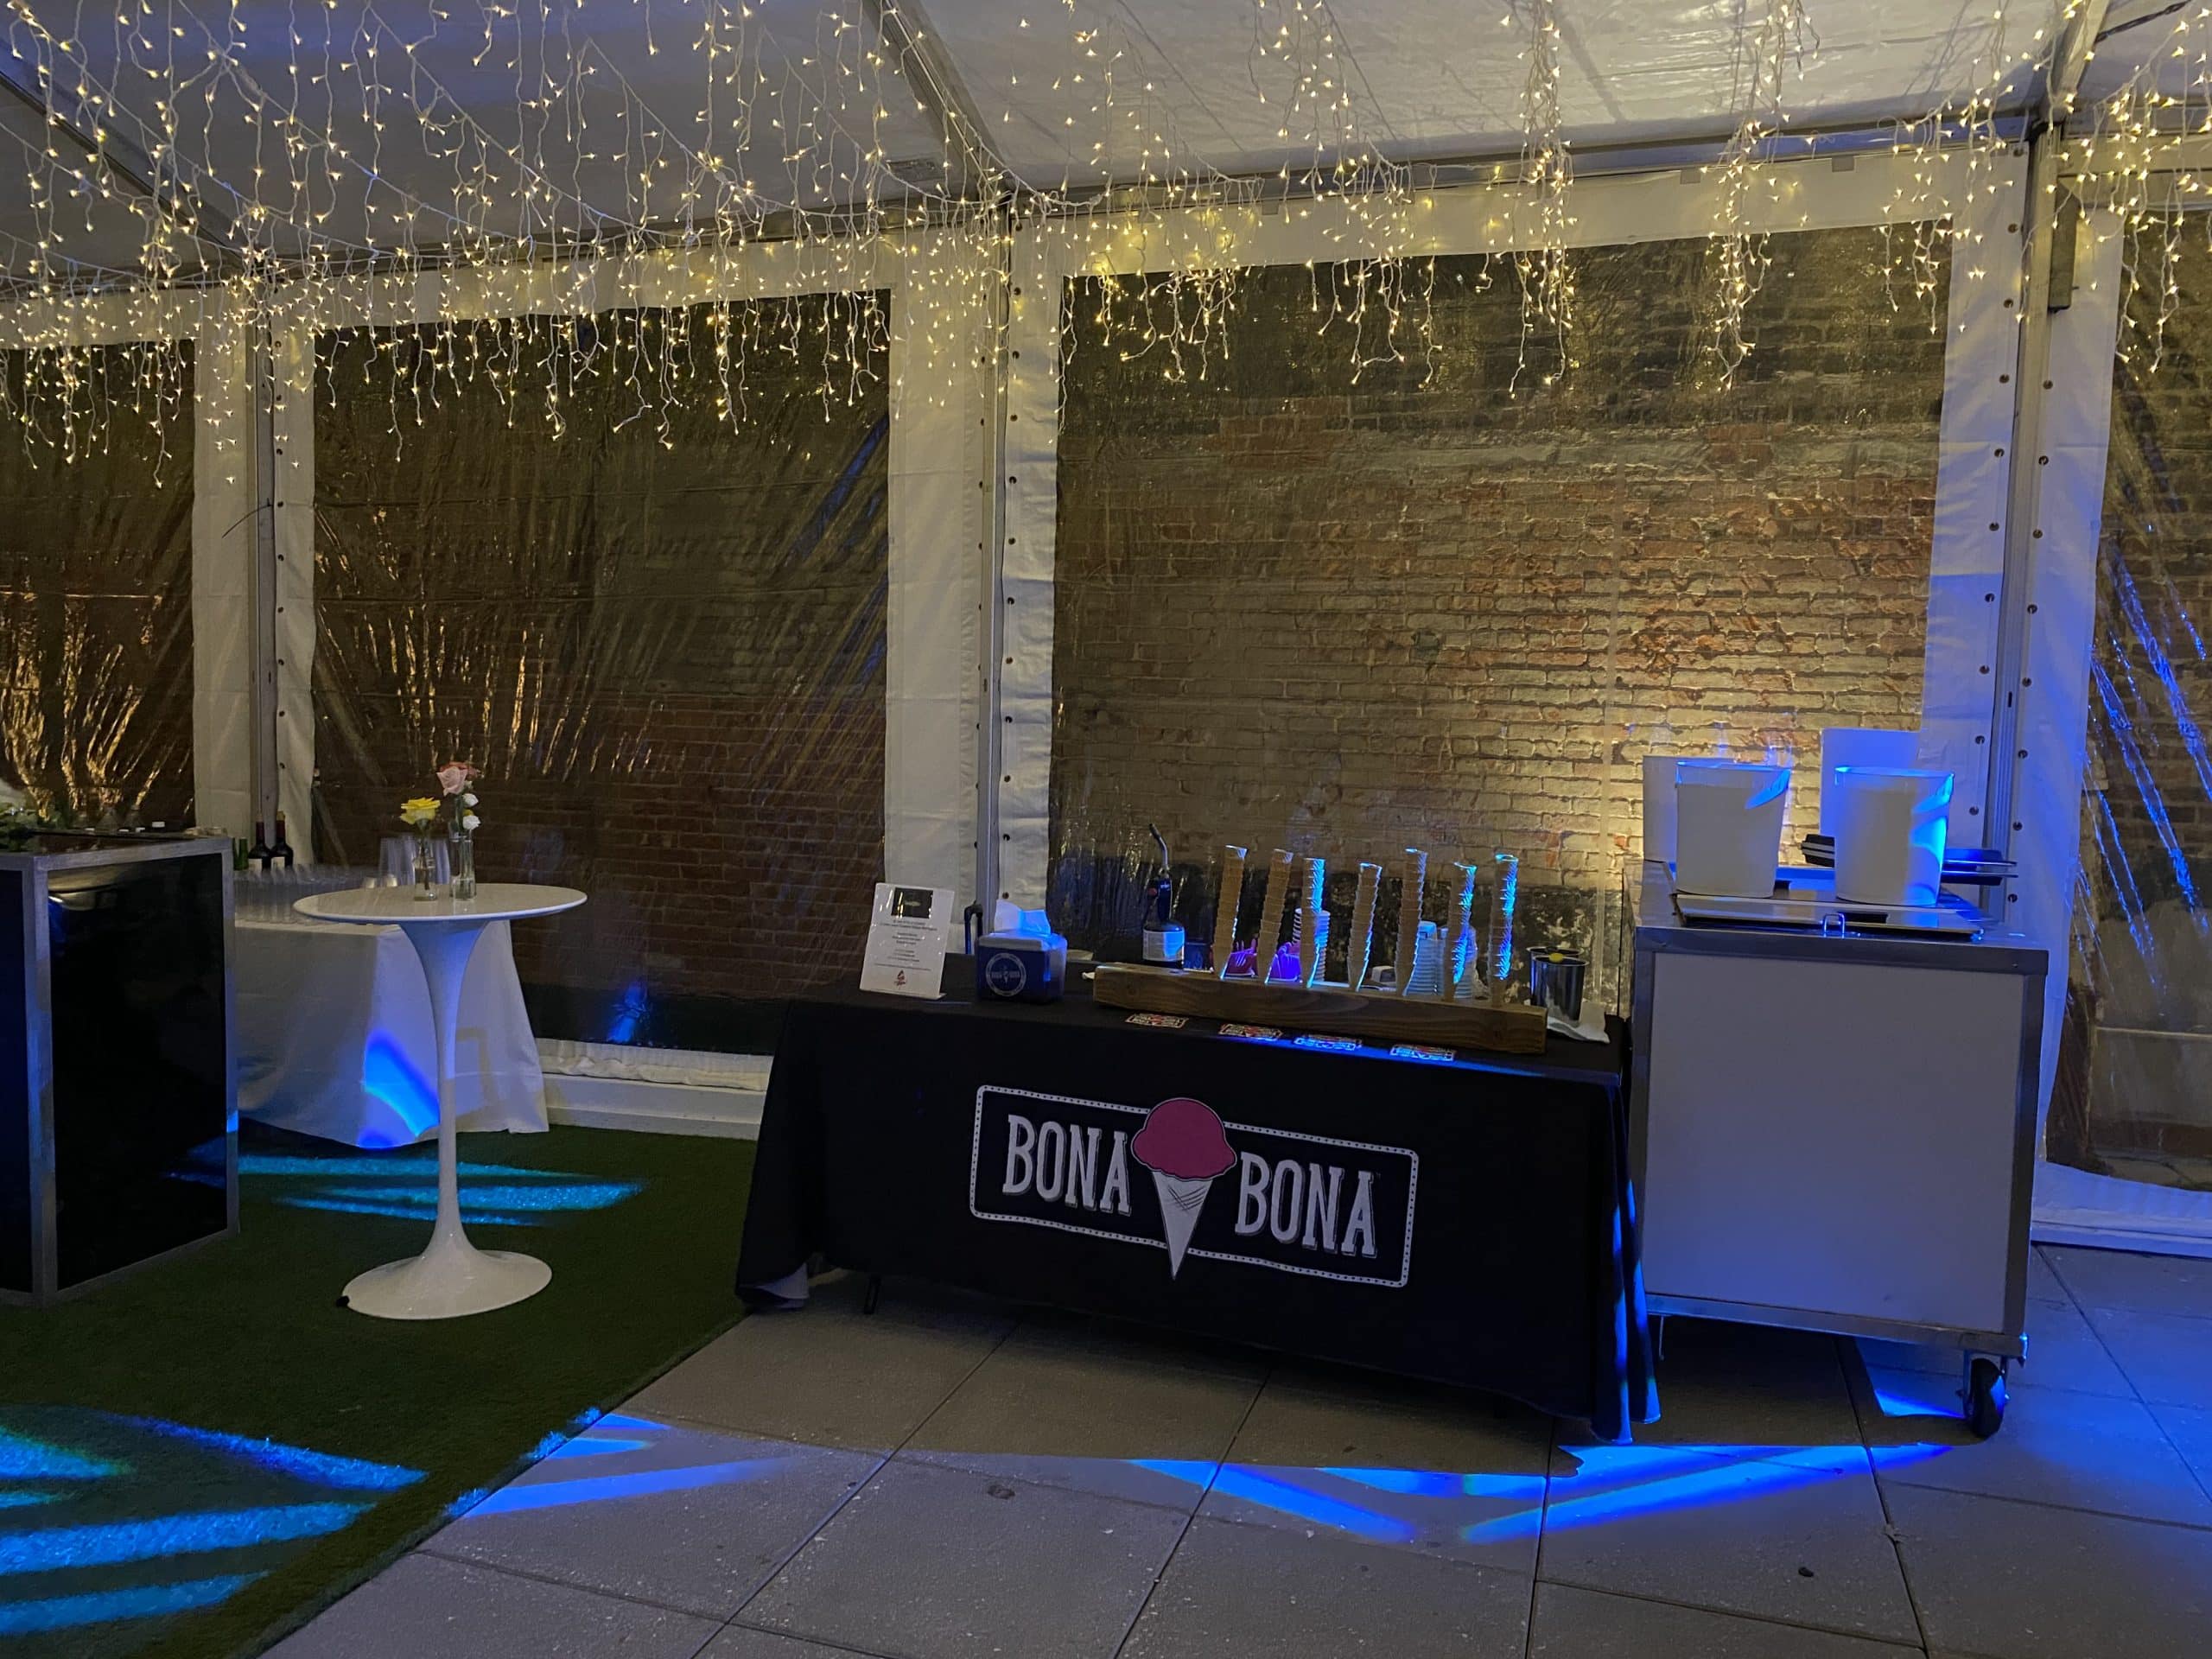 Indoor bona bona catering setup for a private event.